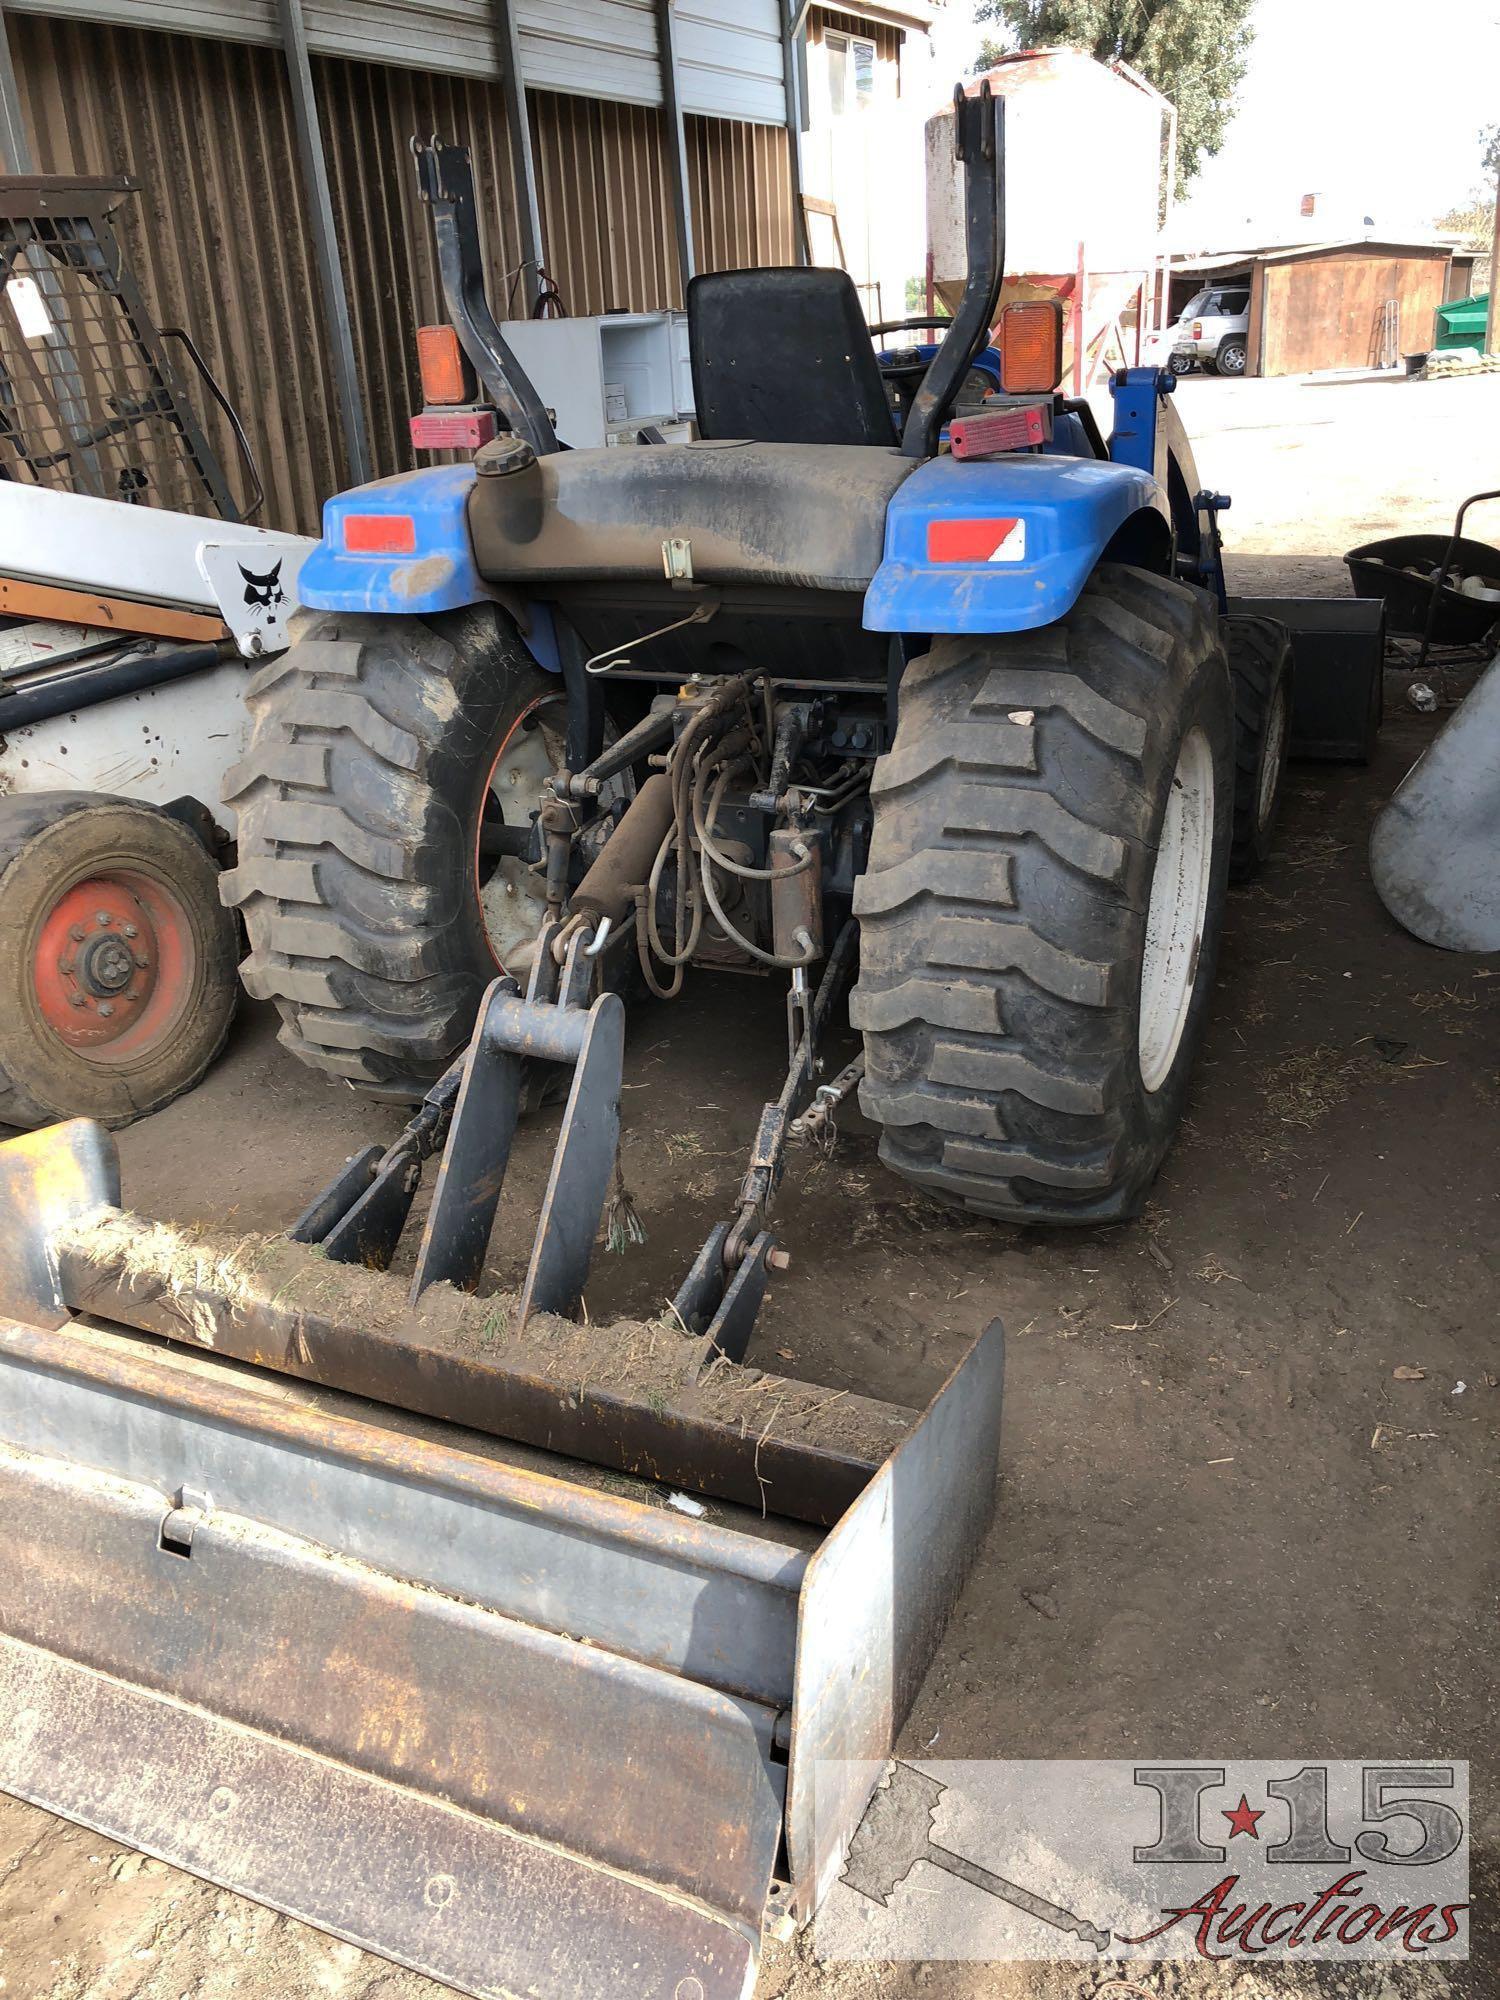 New Holland TC45D 4x4 tractor With ripper teeth